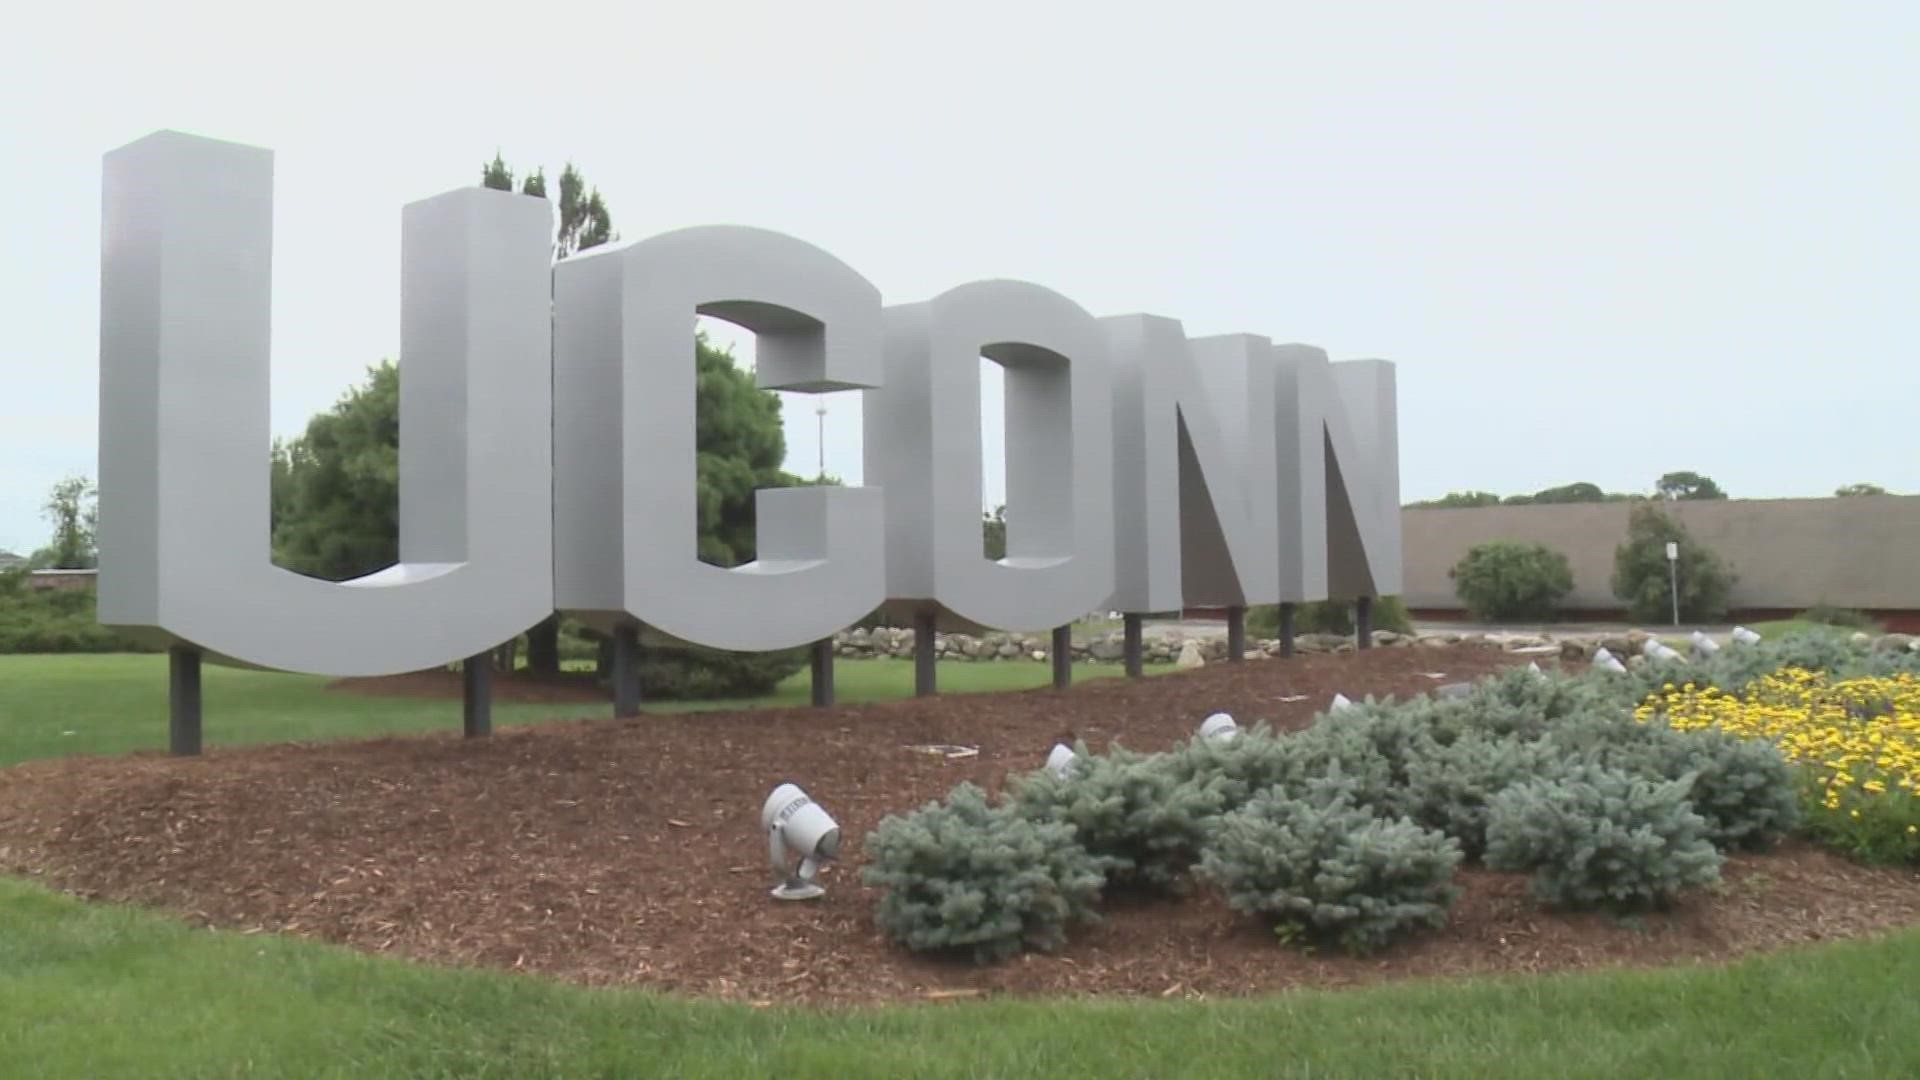 As of August 4, UConn has approved more than 500 unvaccinated students to return to campus this fall.